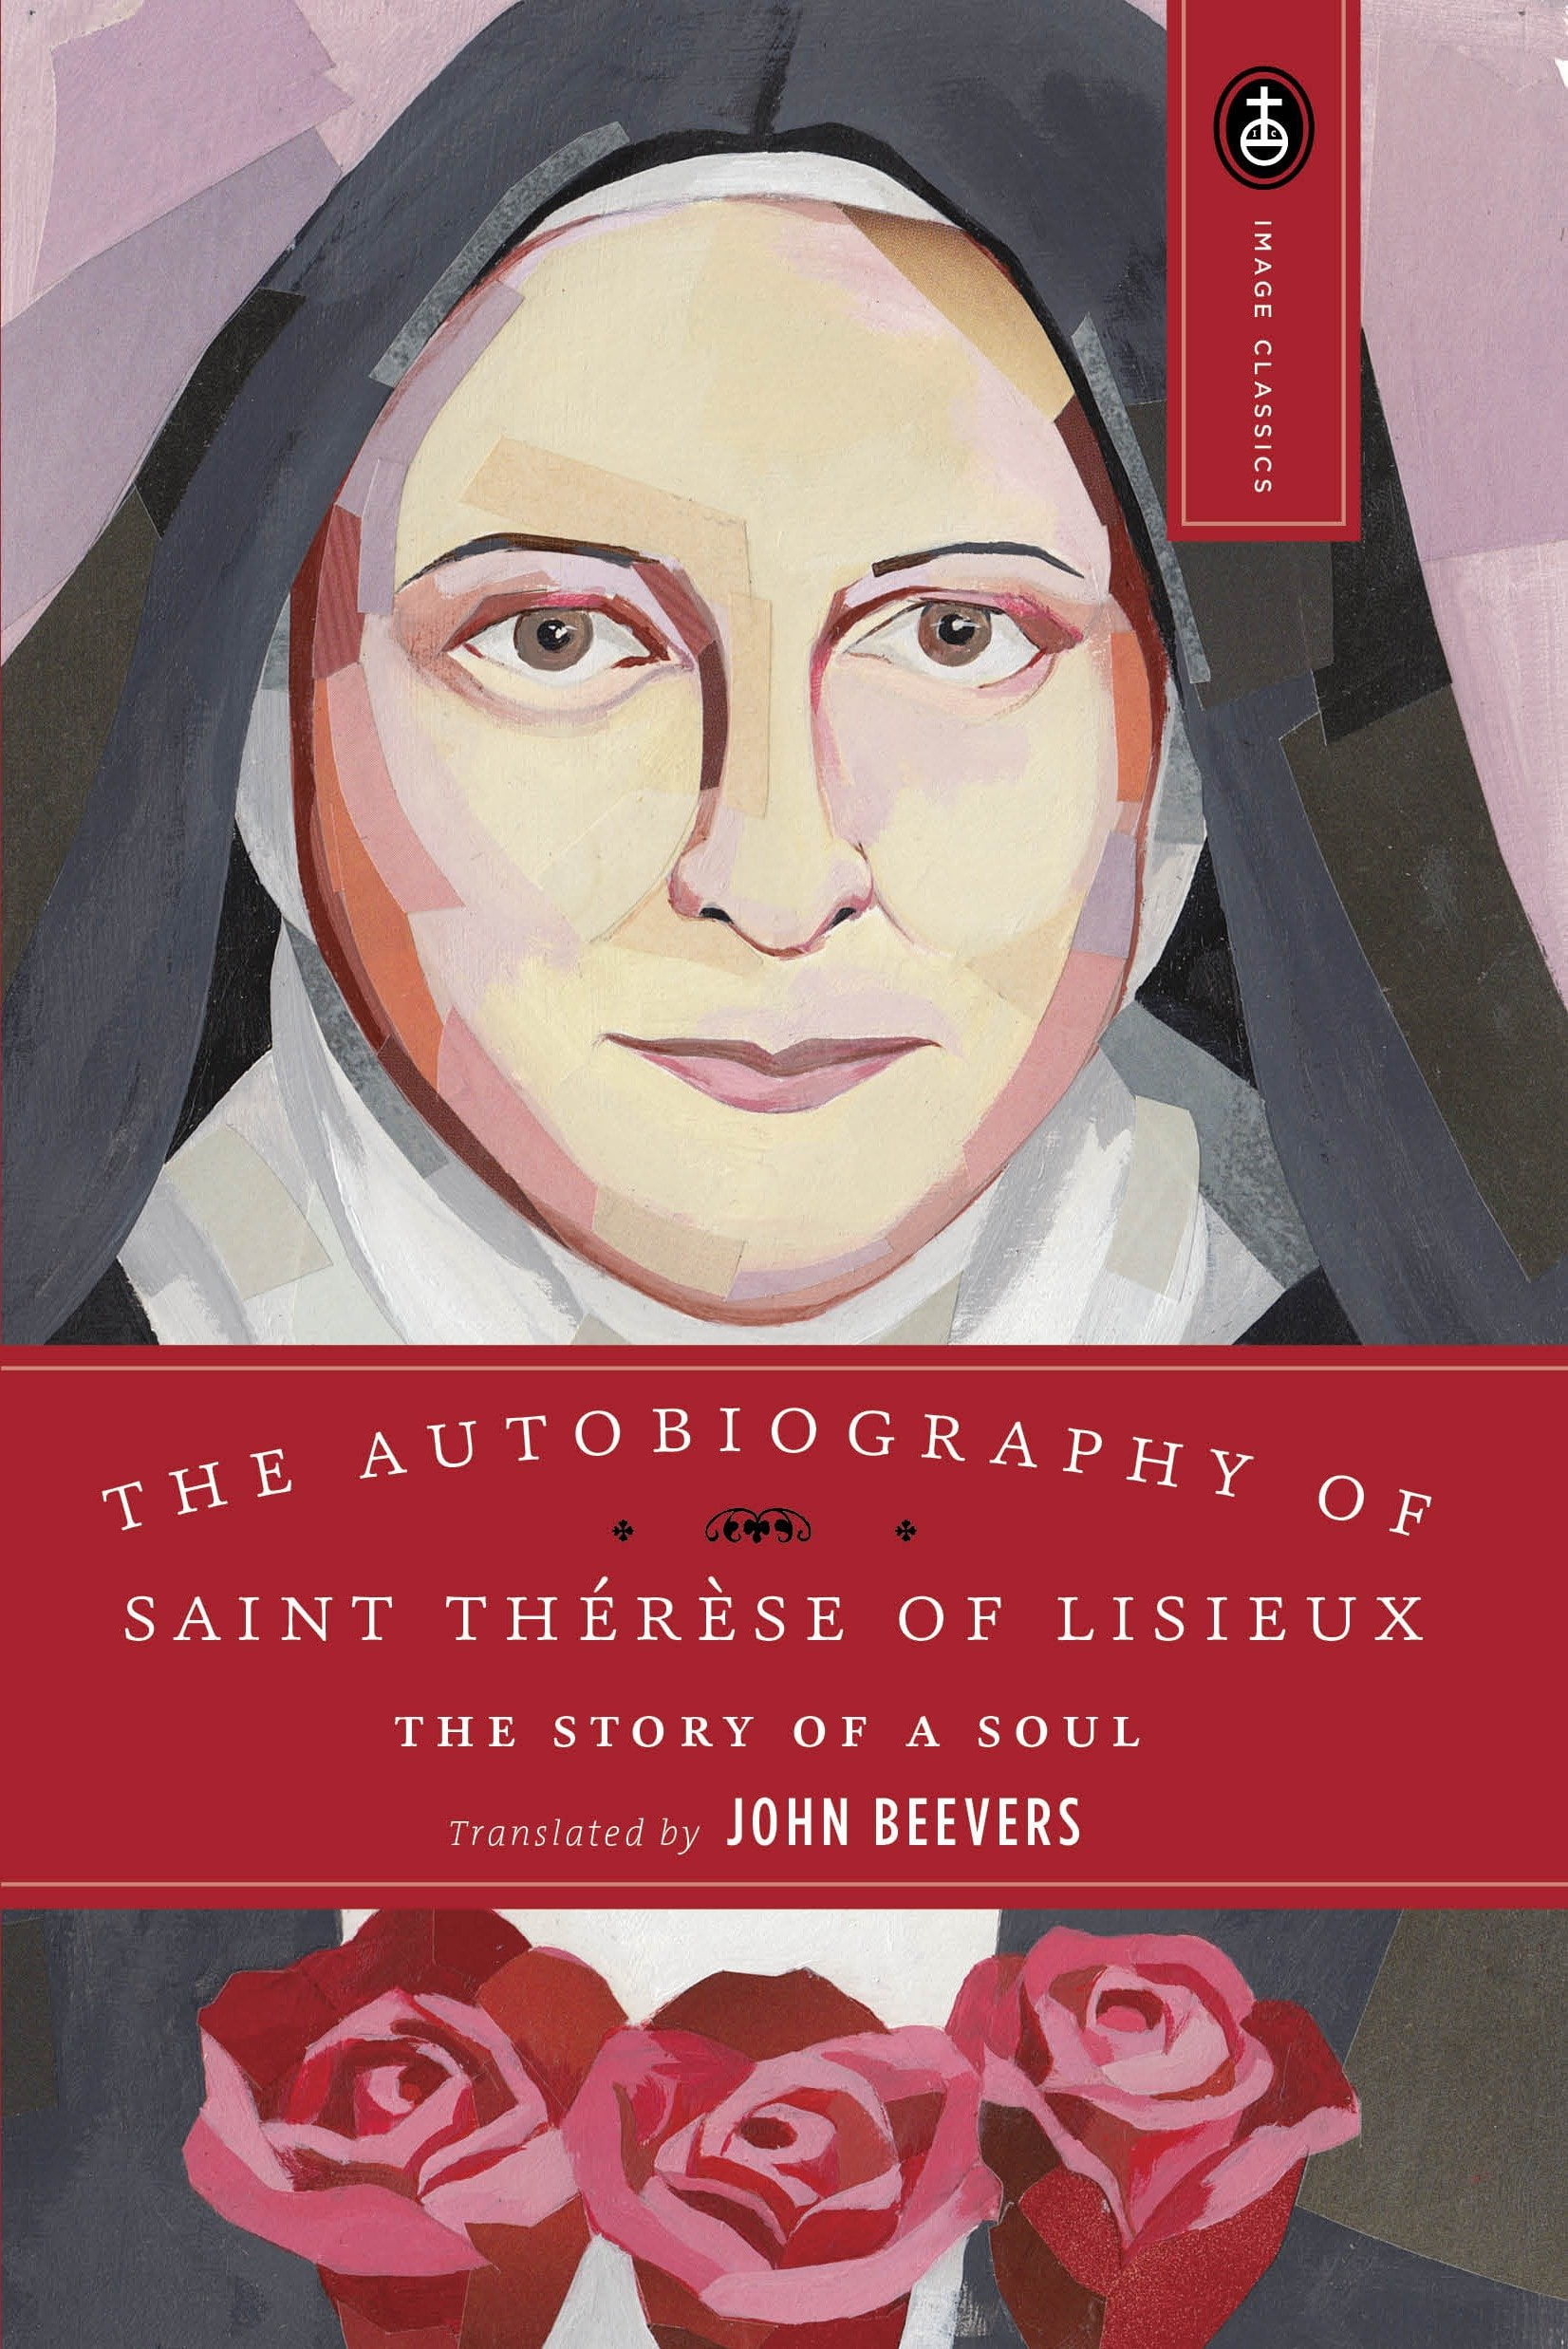 st therese book story of a soul